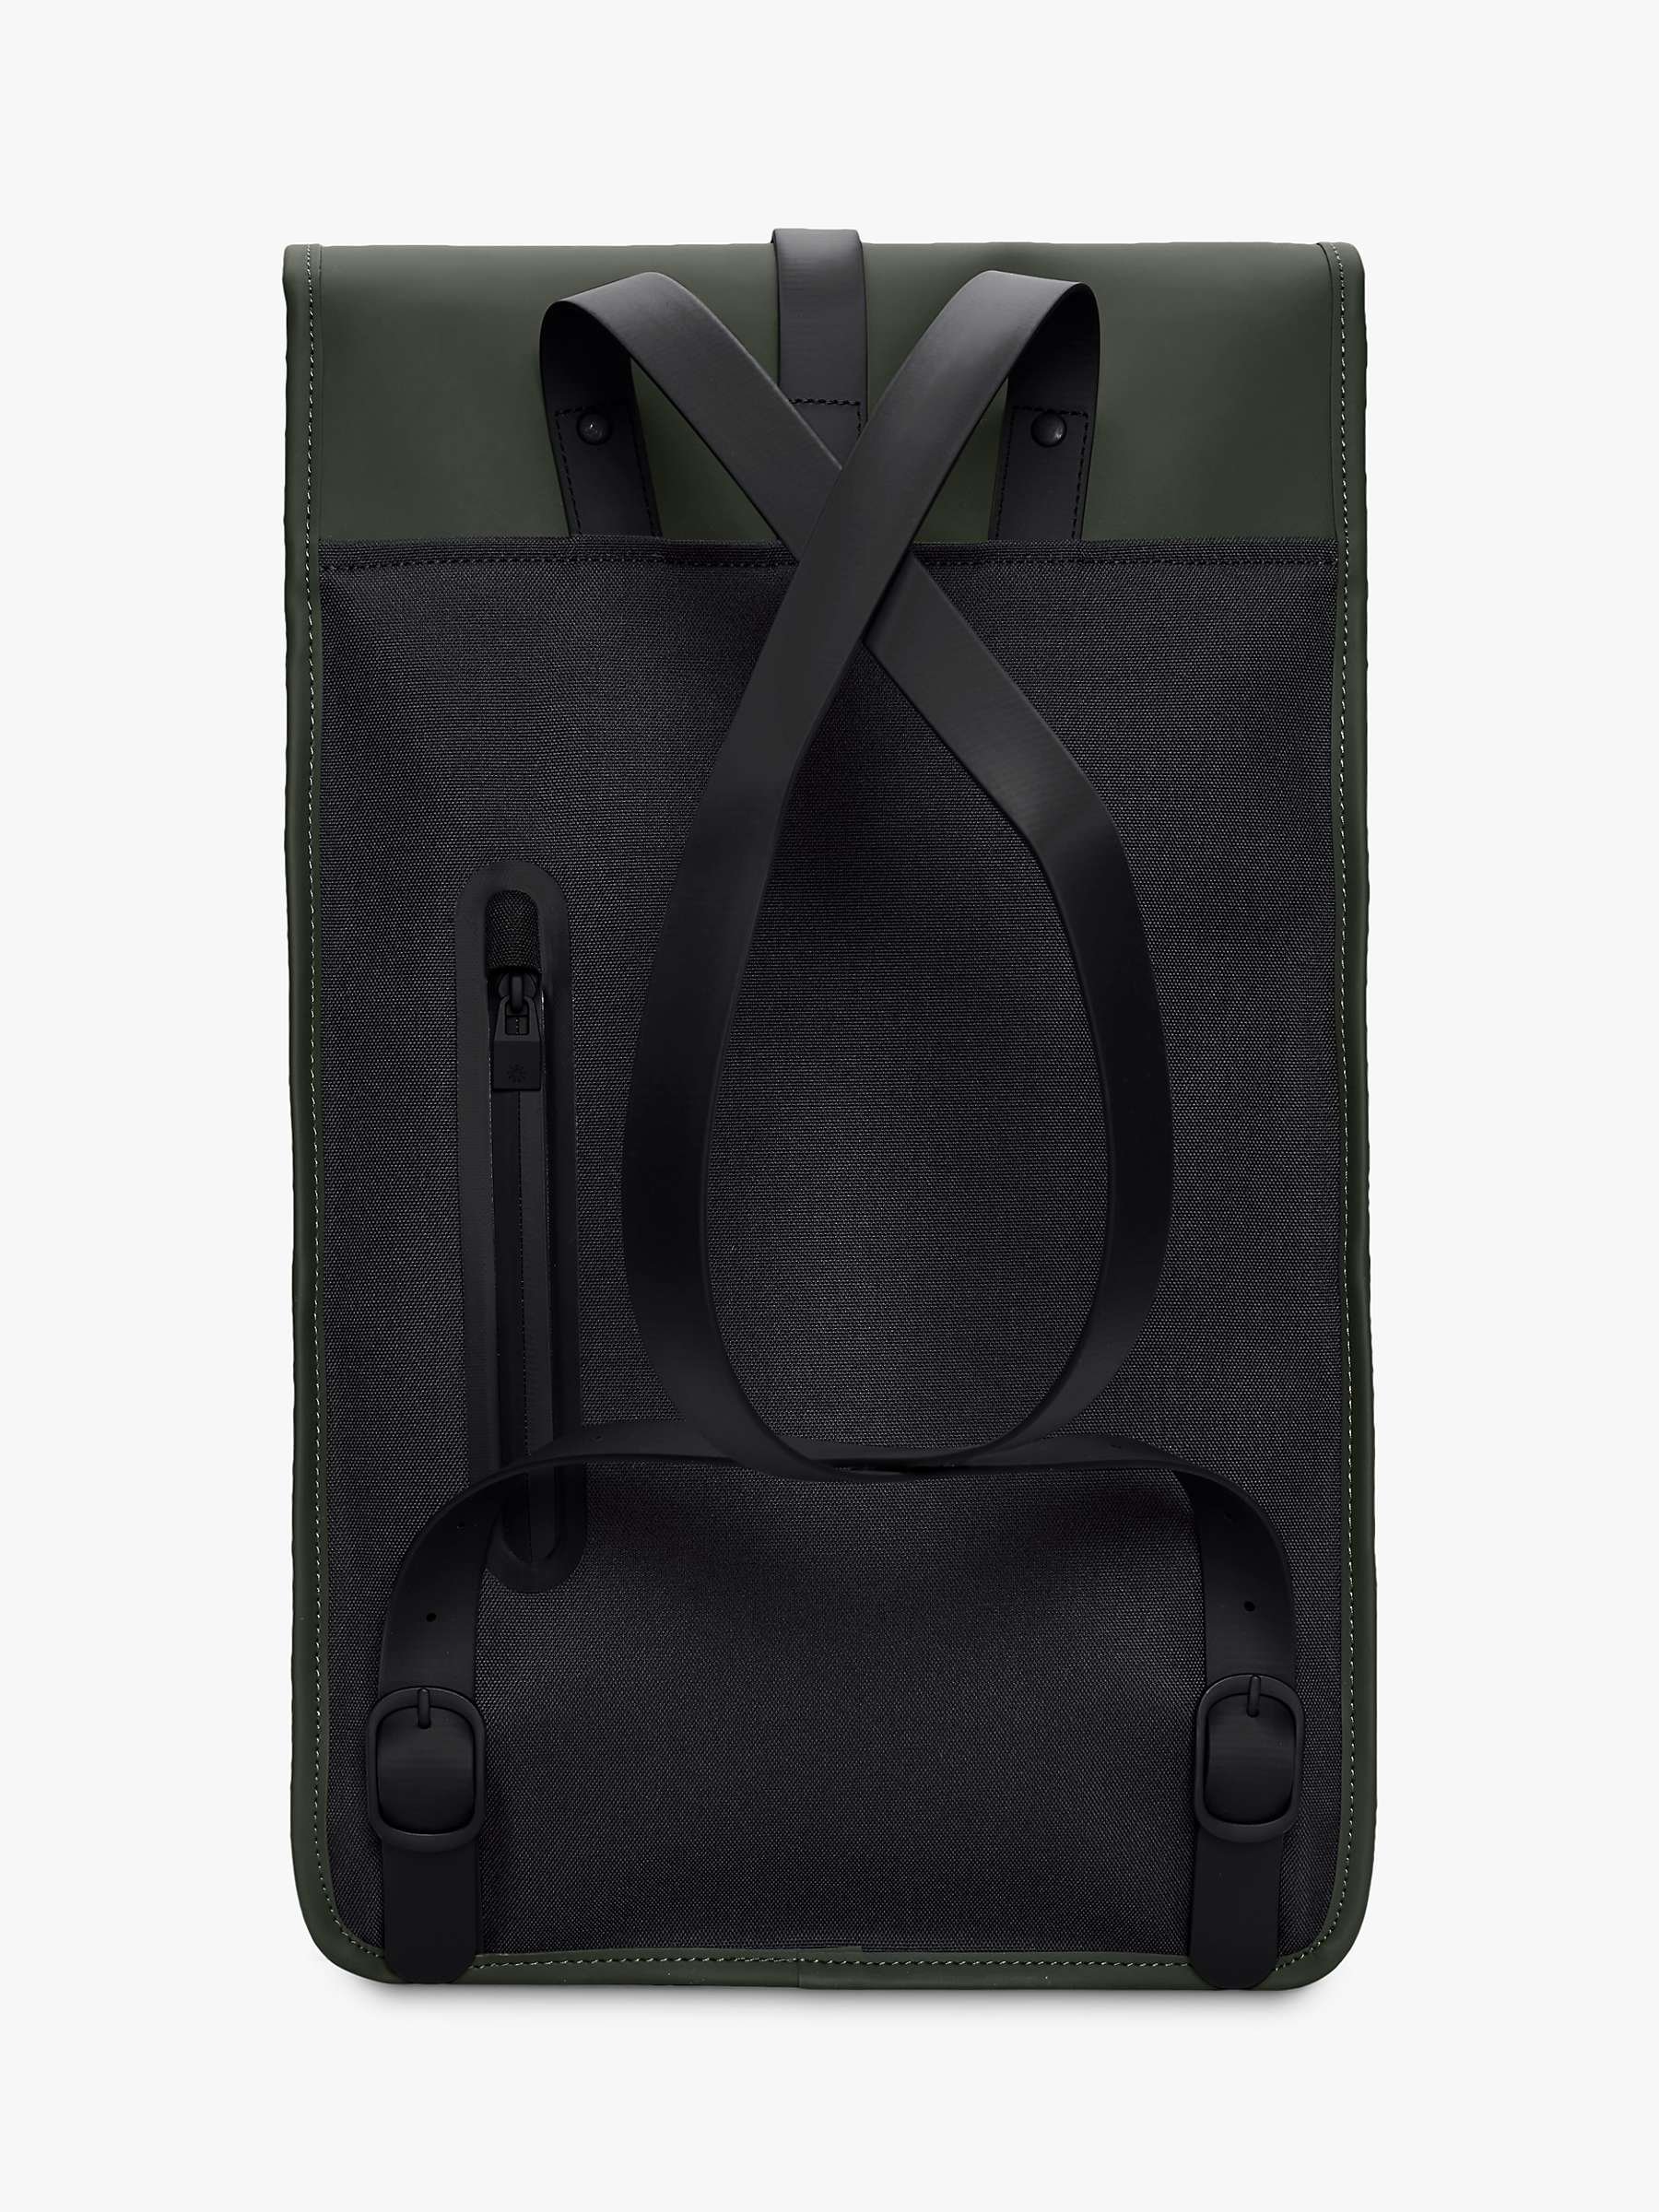 Buy Rains Classic Backpack Online at johnlewis.com